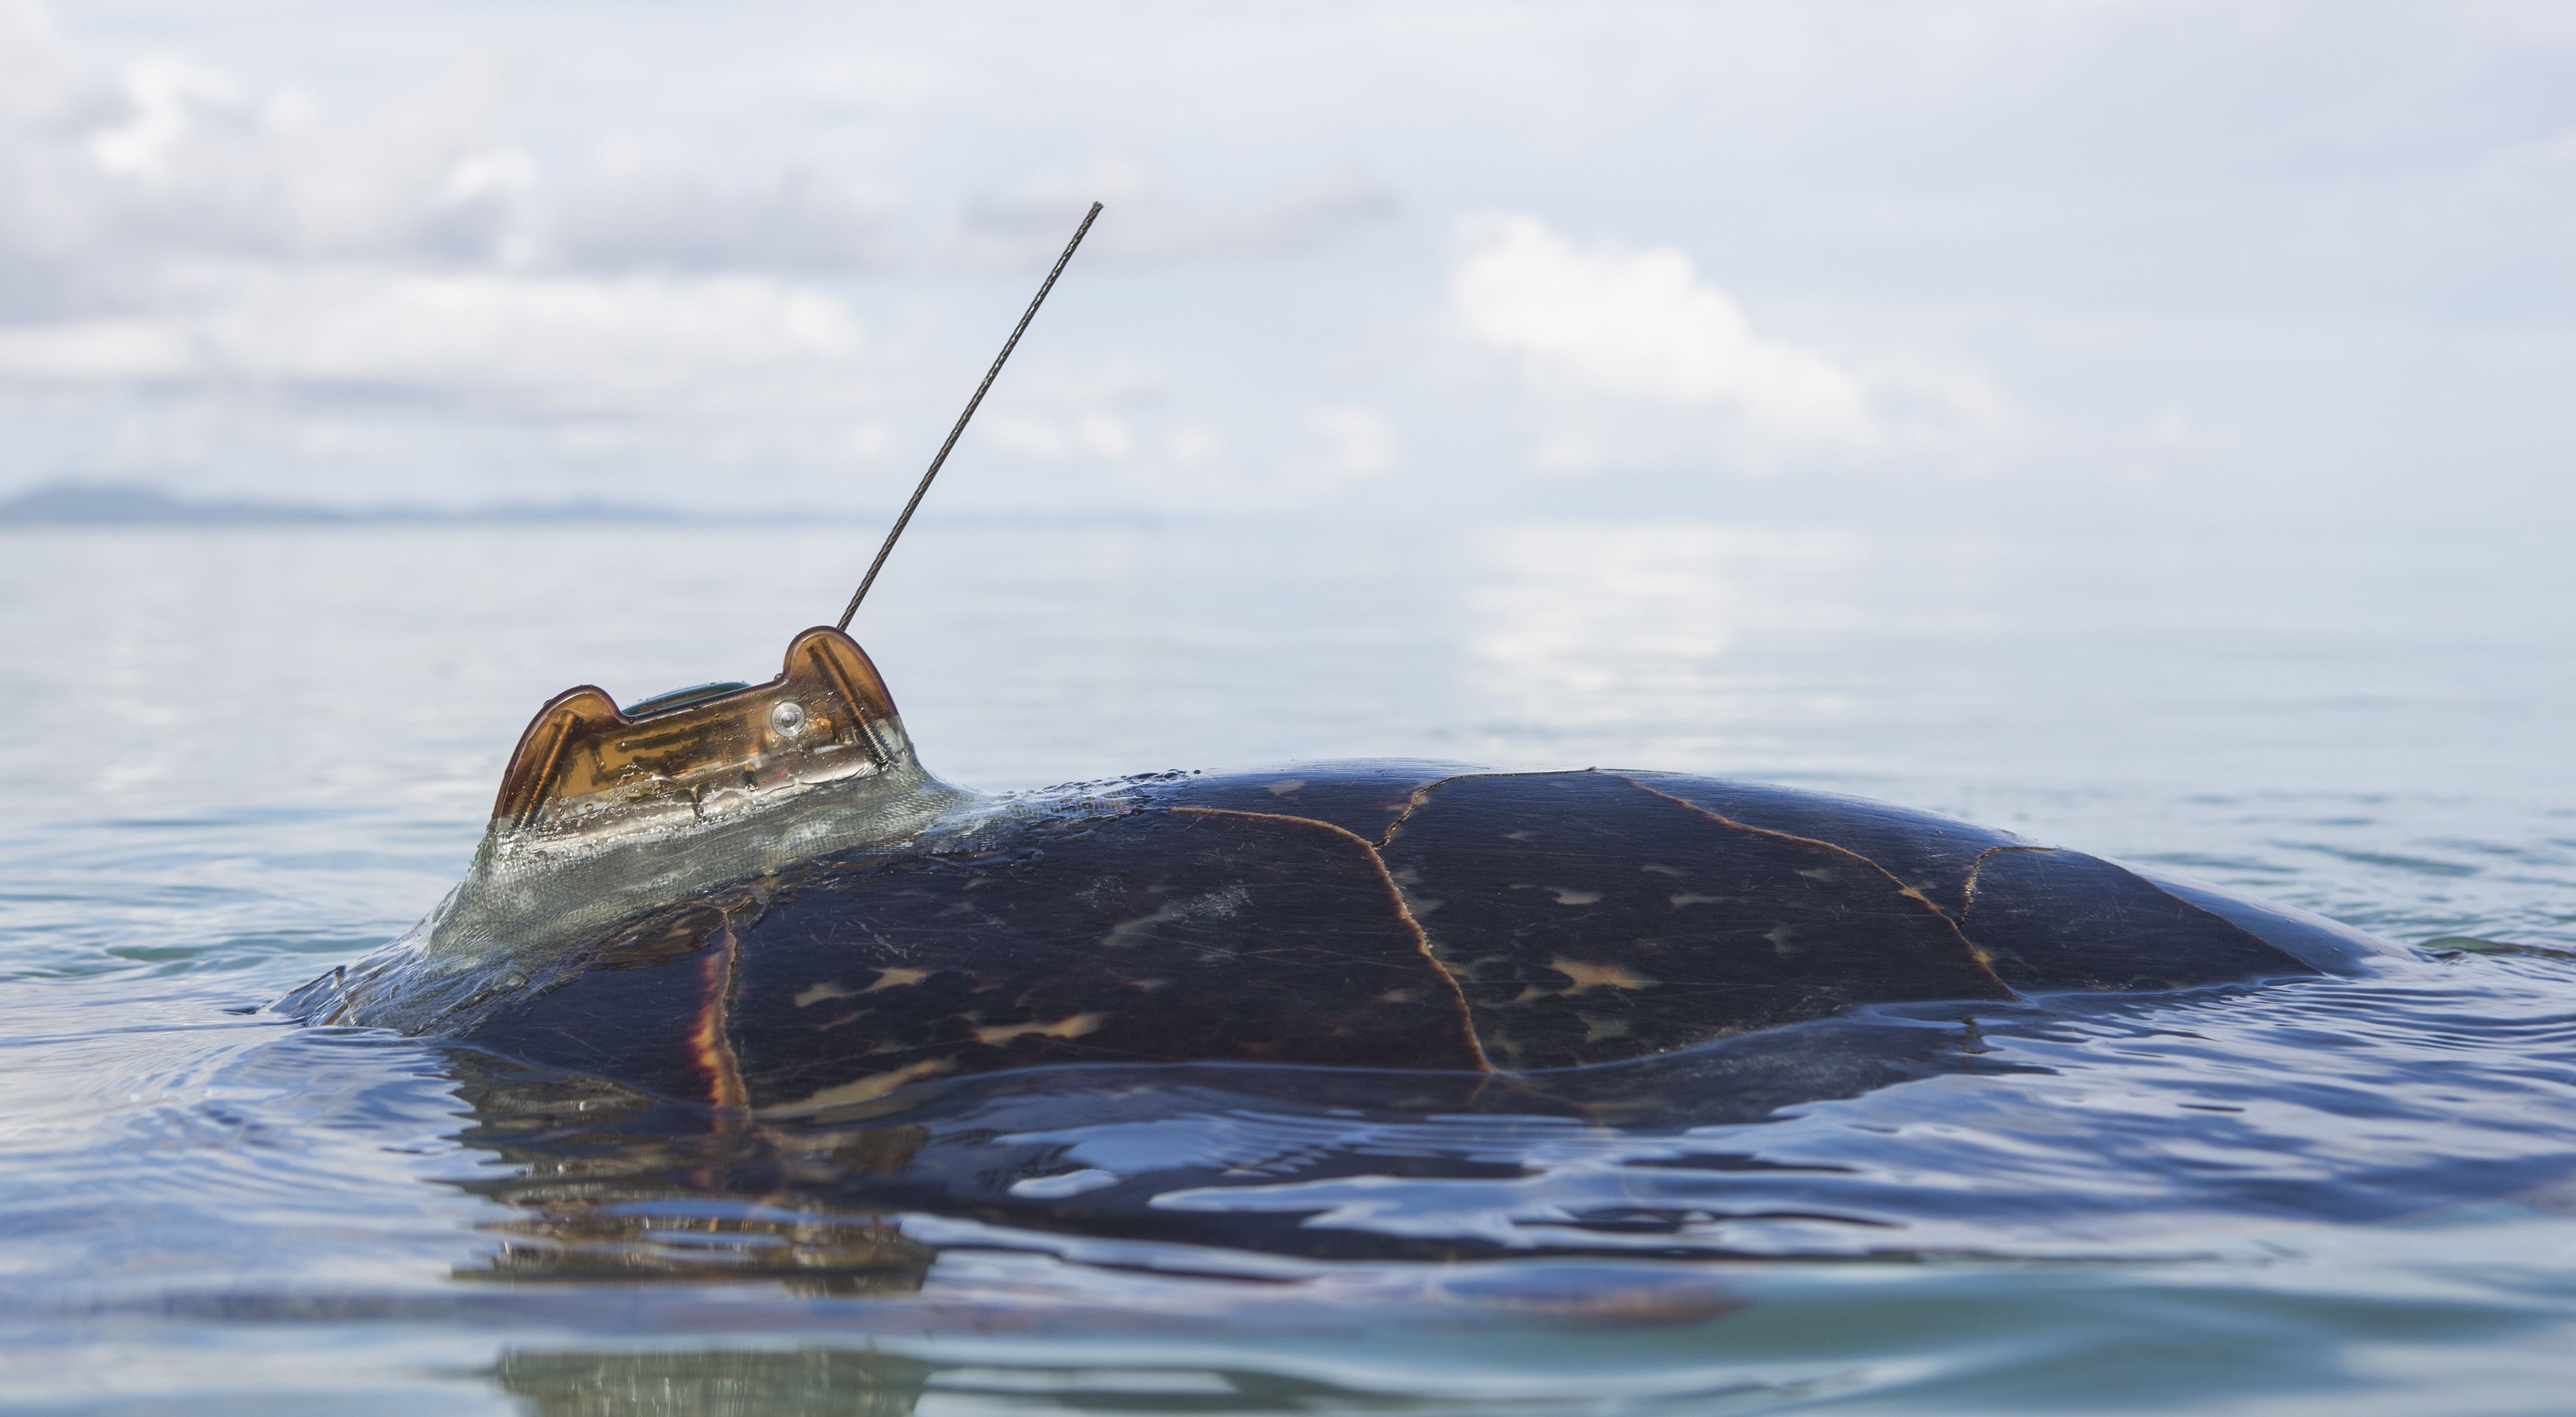 A turtle at the ocean's surface has a tracking device on its shell